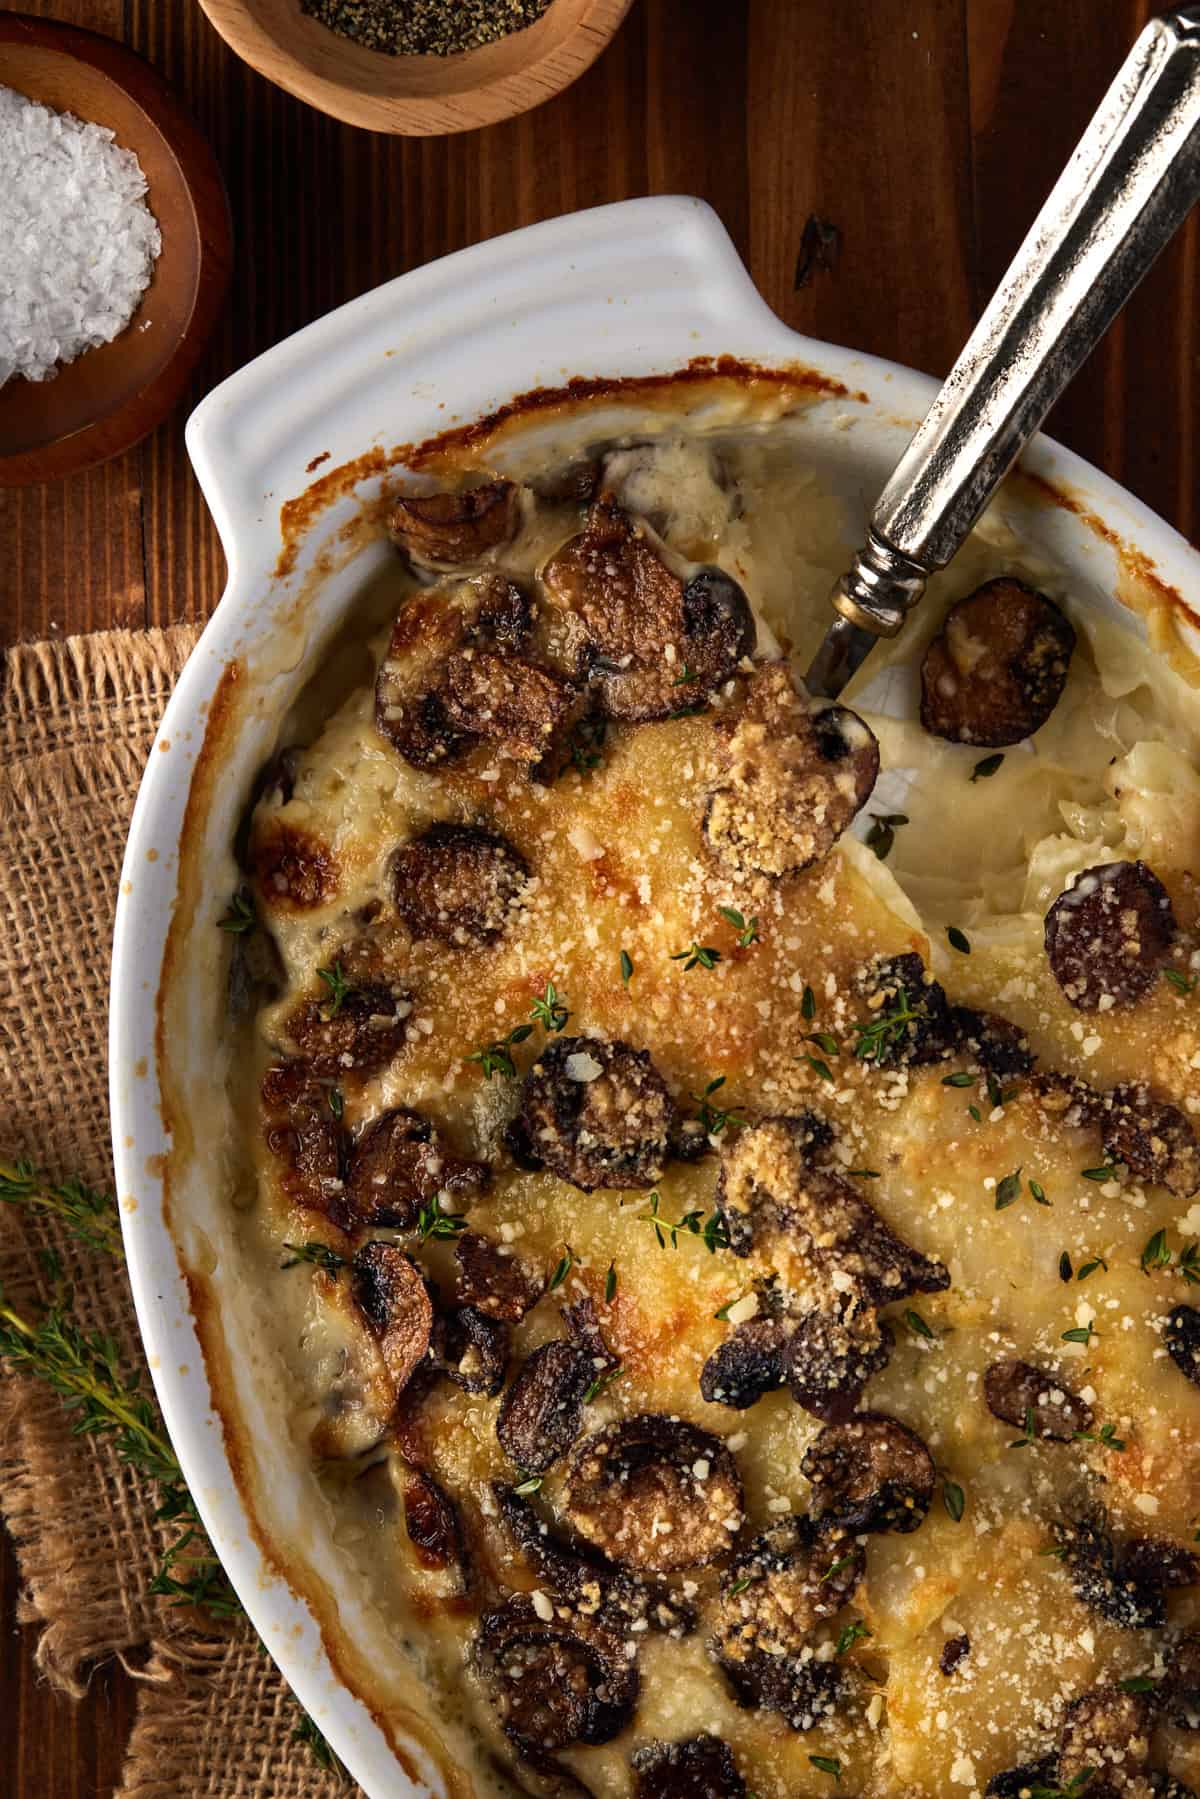 Potatoes, mushrooms and cheese baked in a gratin dish.